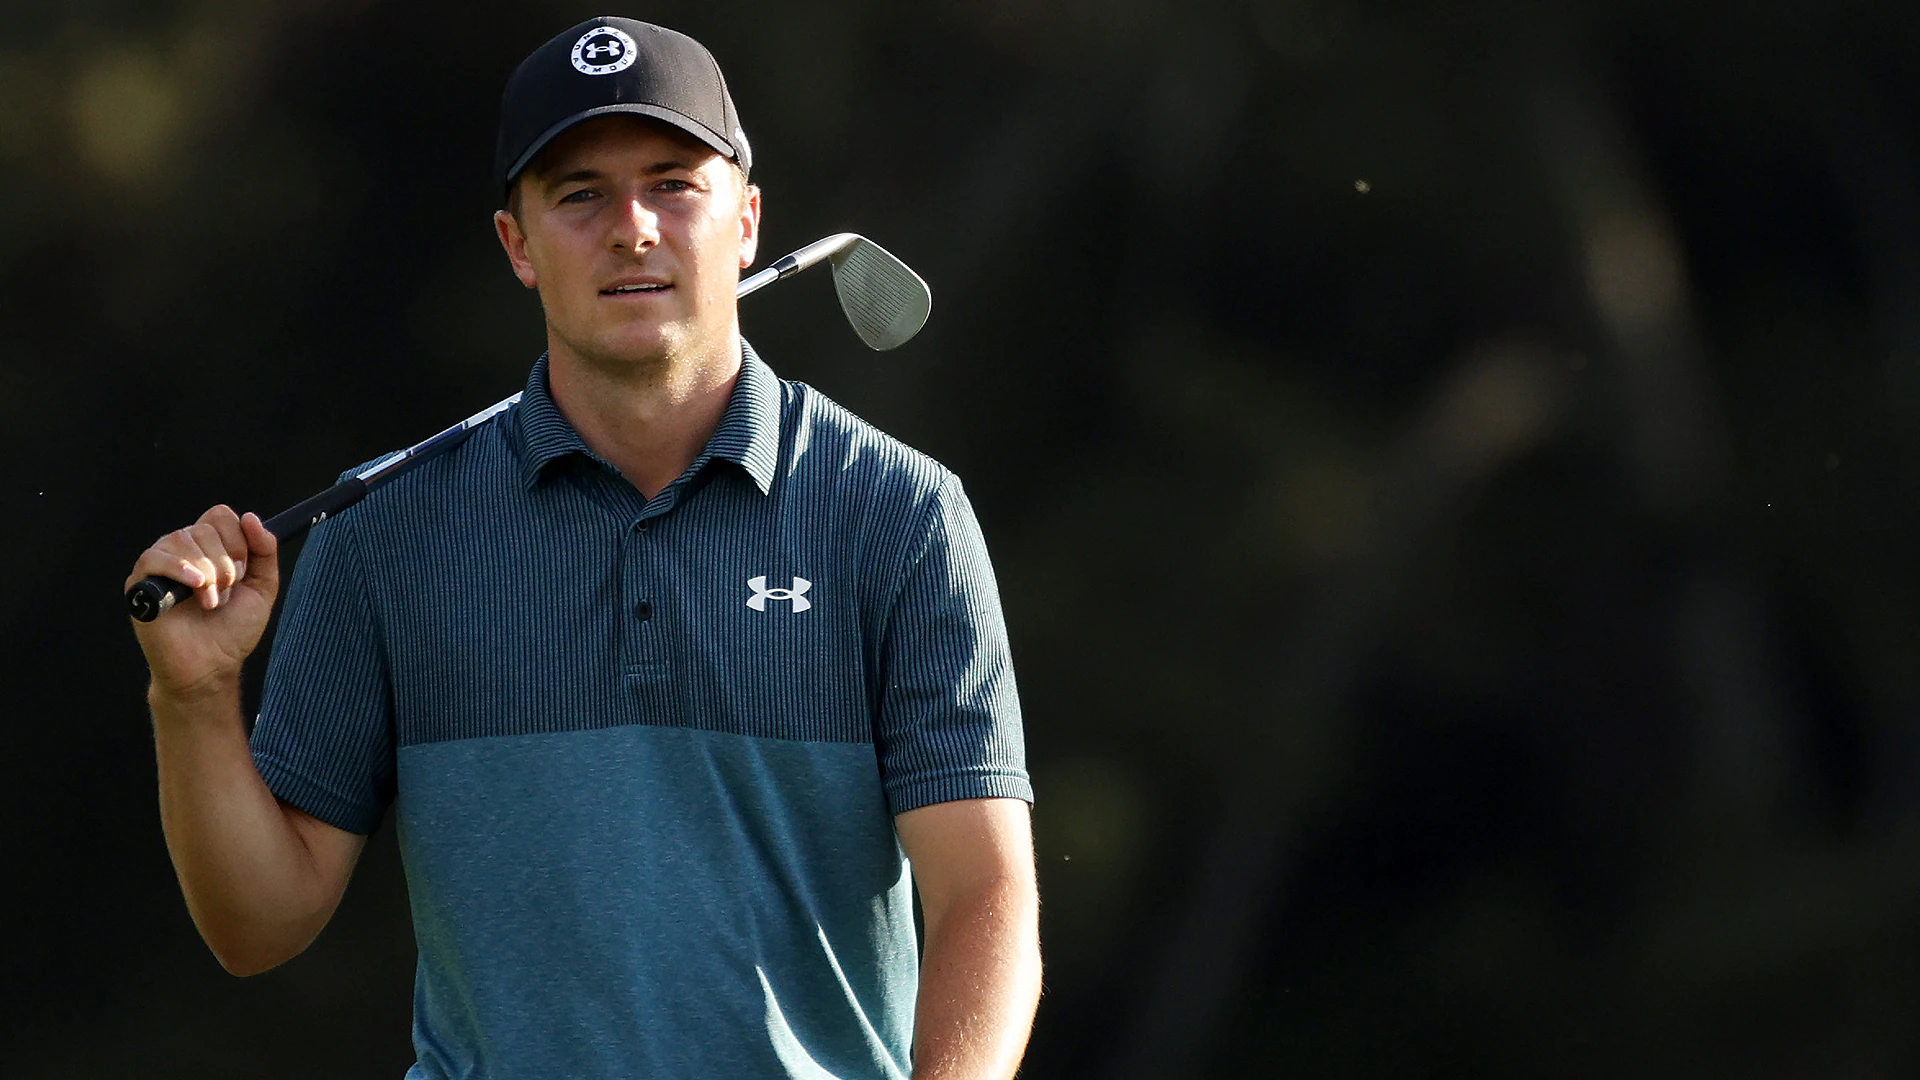 2021 Masters: ‘Couple bonehead mistakes’ and fatigue cost Jordan Spieth at Masters